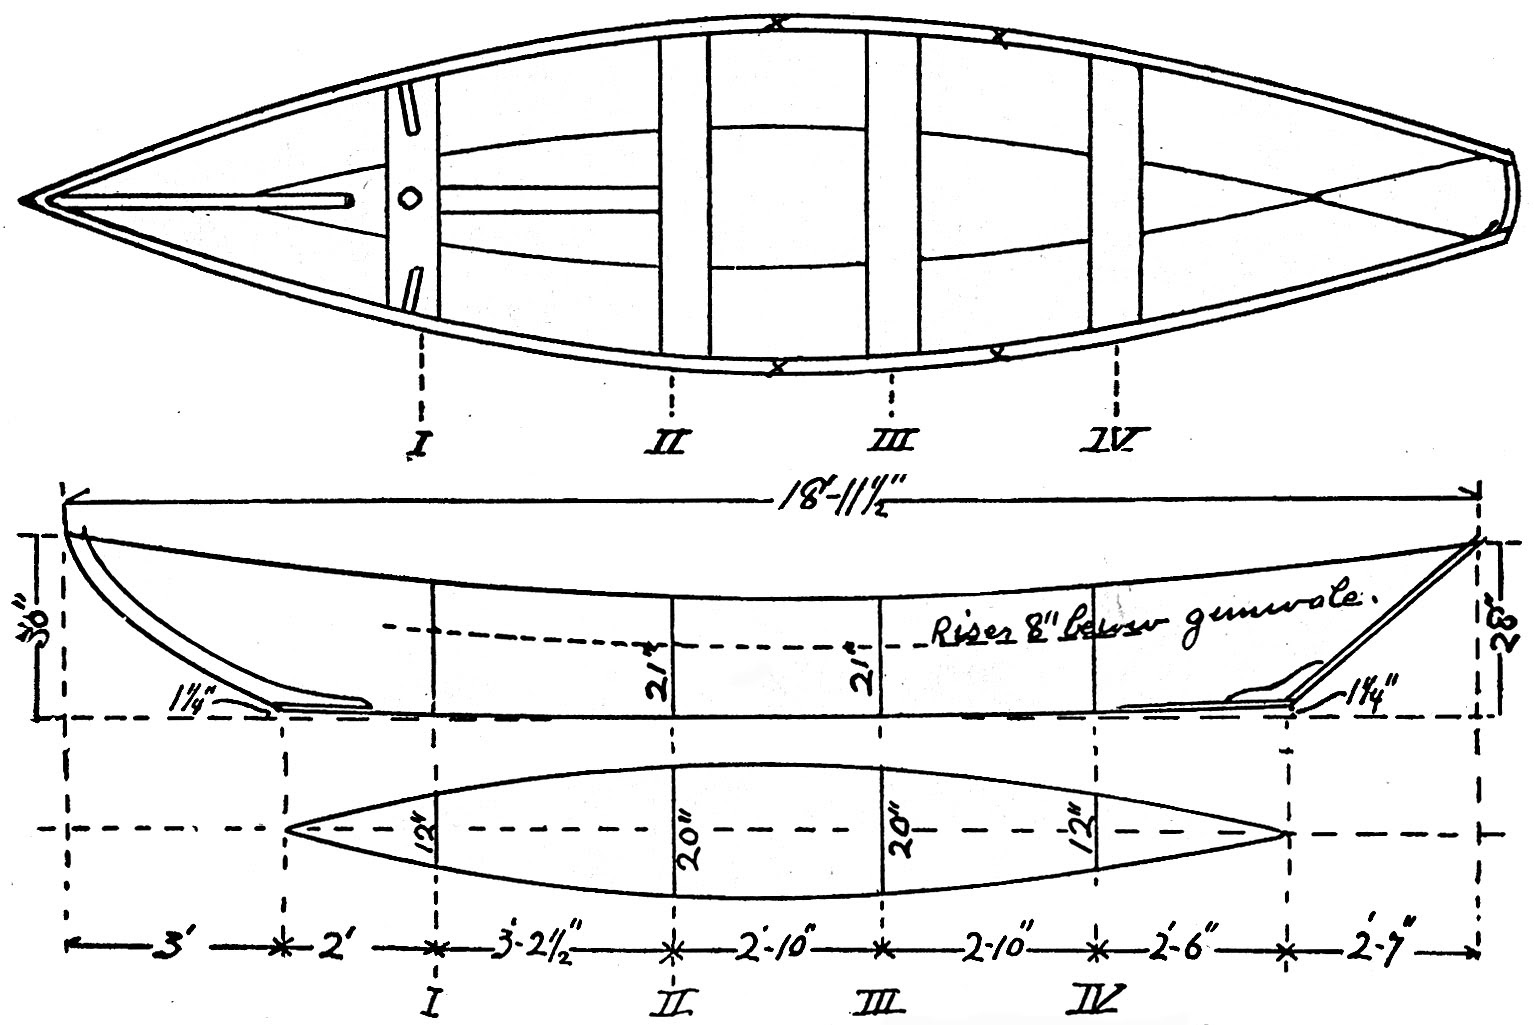 Where to get Flats boat plans images ciiiips